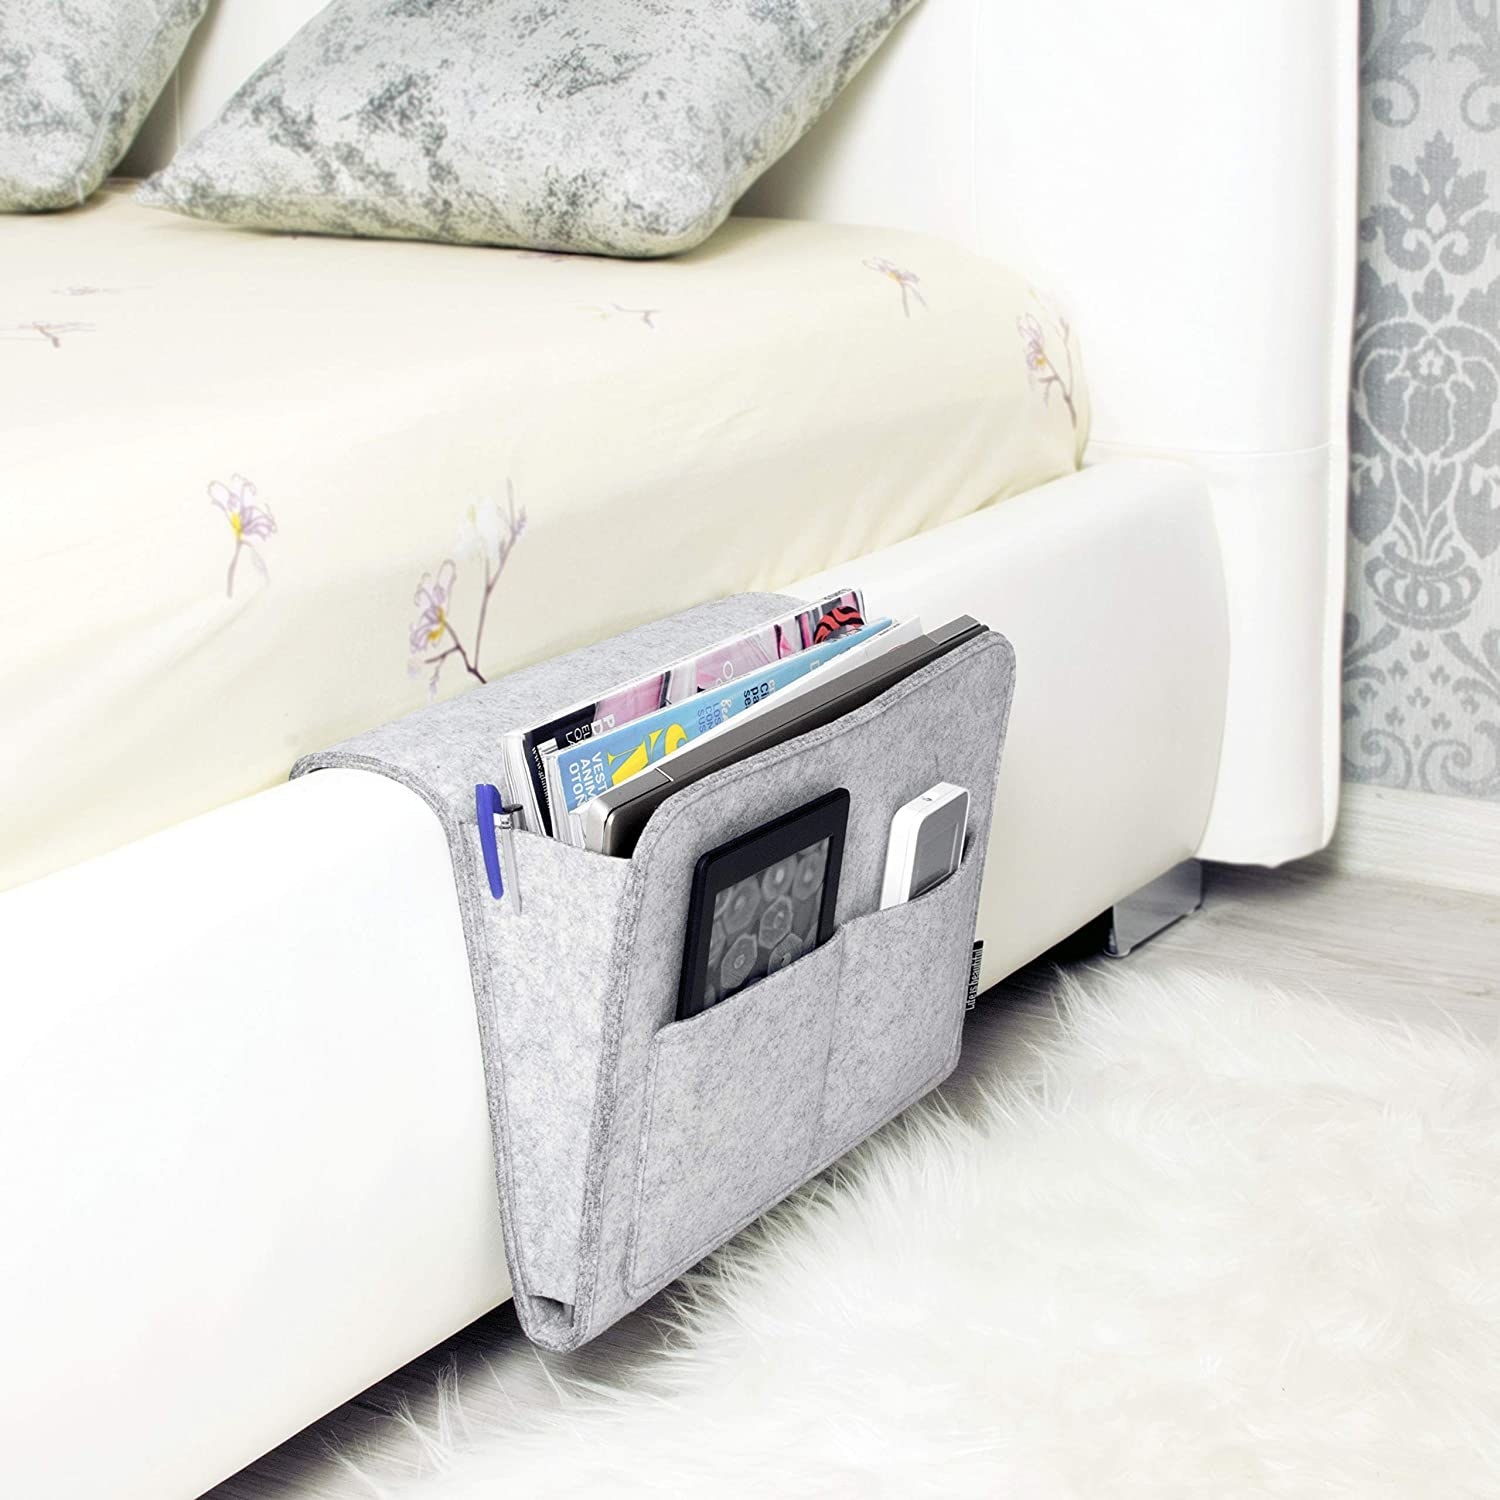 The bedside caddy is tucked into the side of a bed